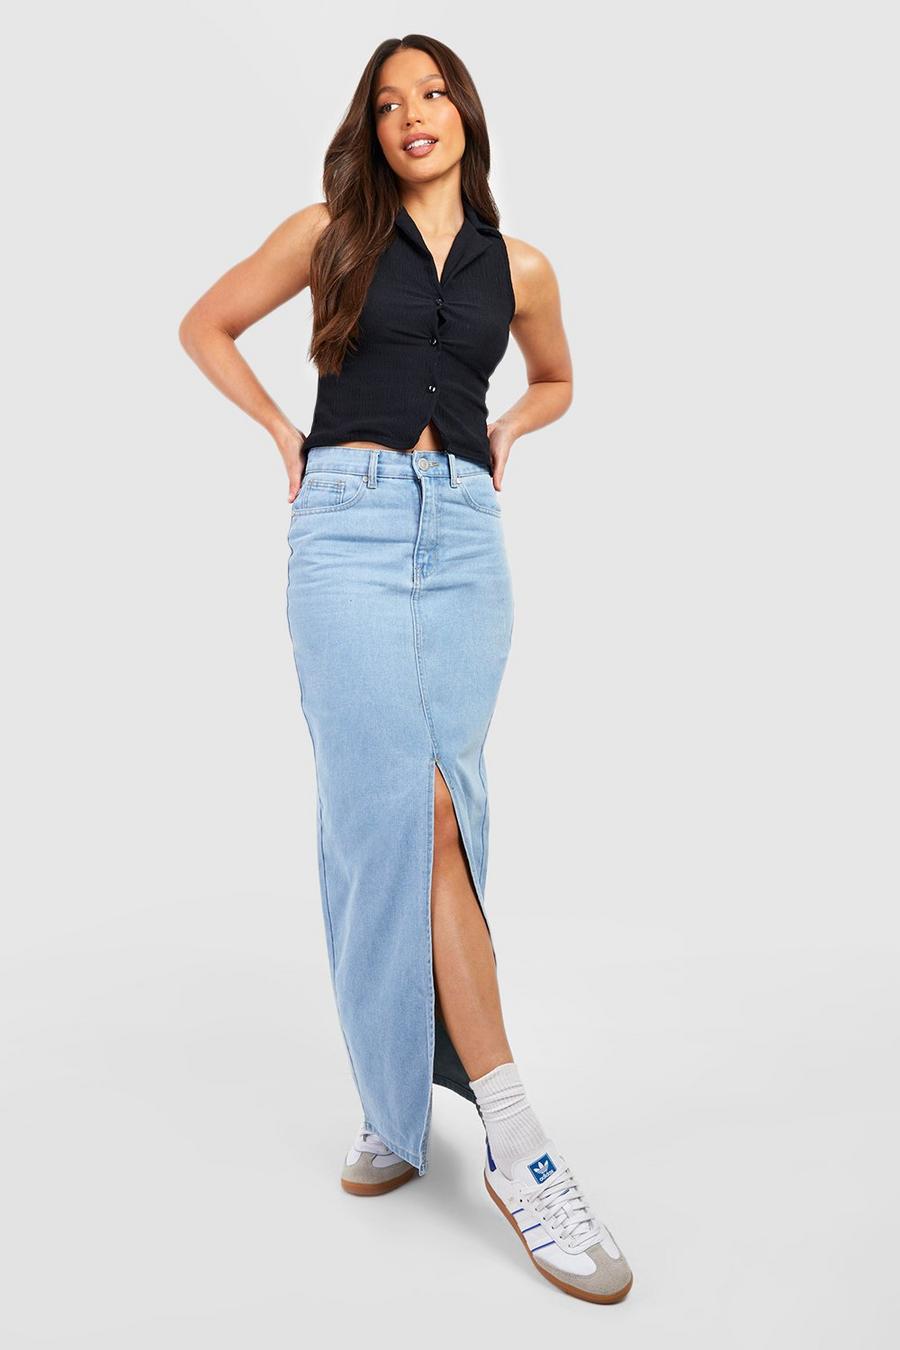 Gonna maxi Tall in denim con spacco frontale, Light wash